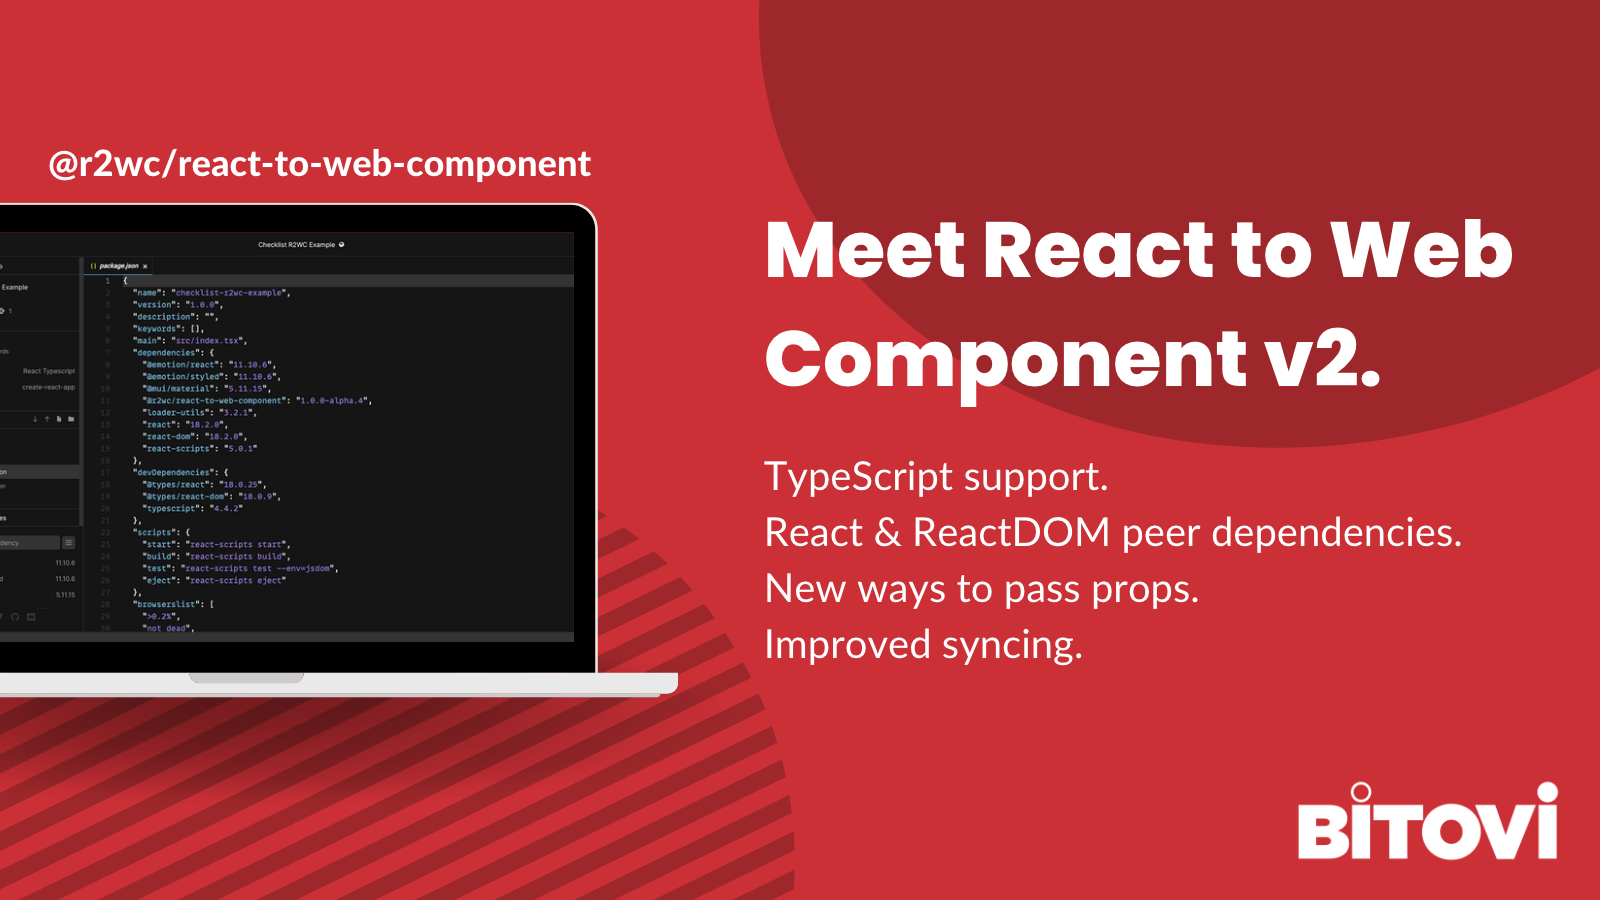 Meet React to Web Component v2